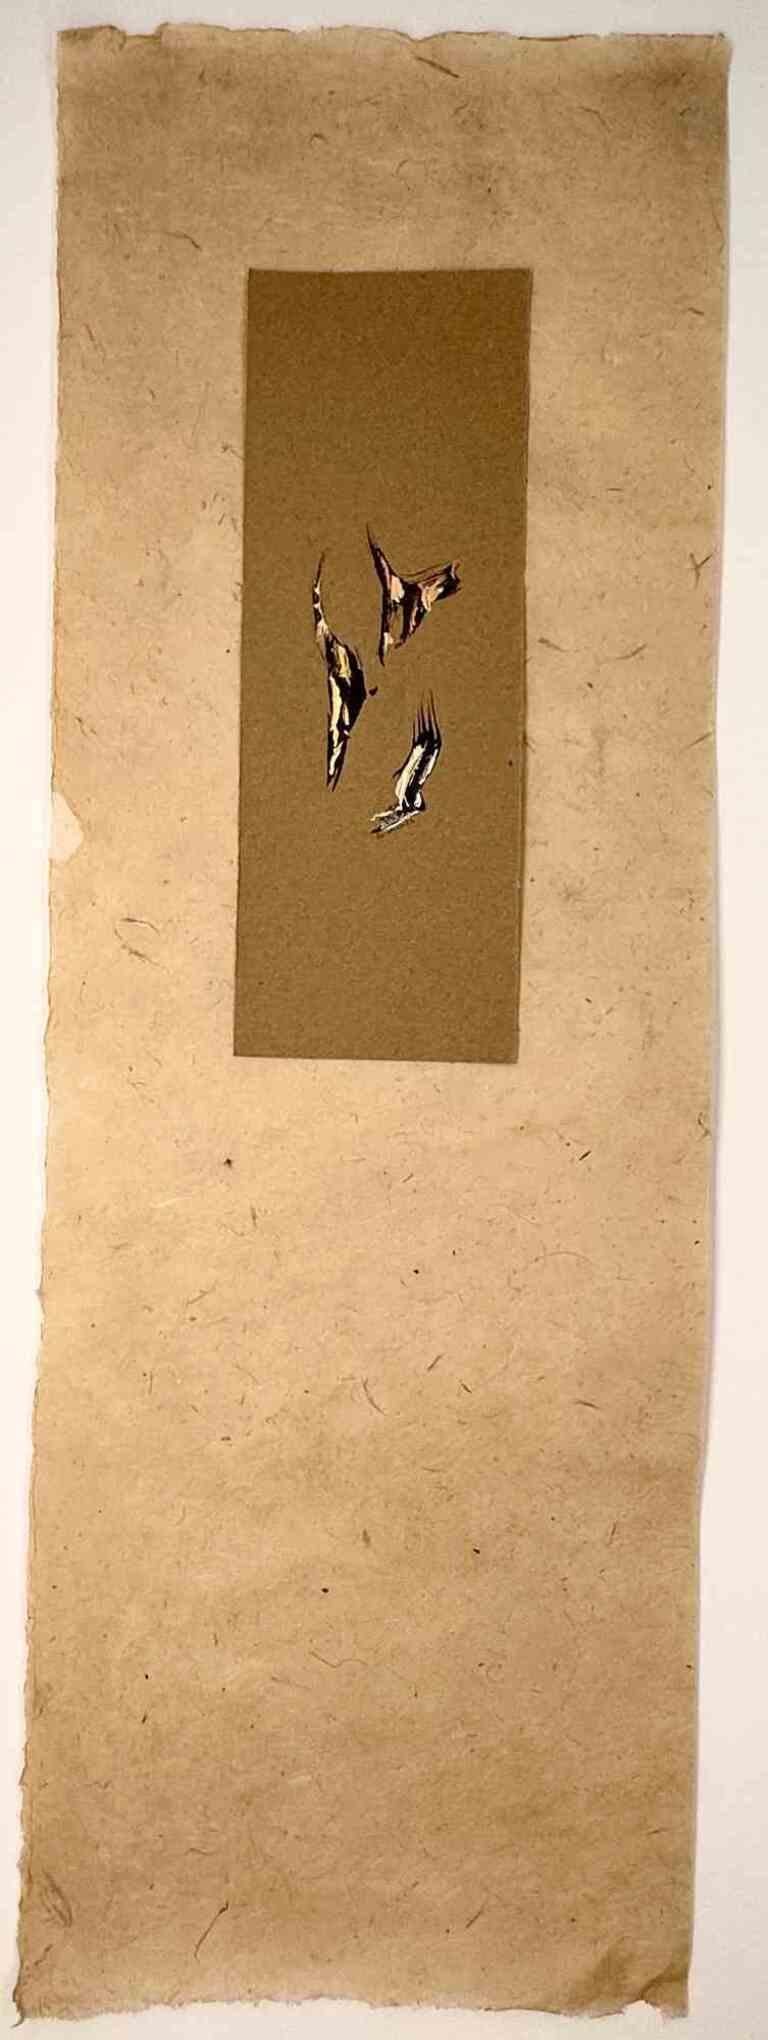 Alchemical Season of Freedom is a drawing realized by Iranian Painter and Poet Parimah Avani in 2023.

Sumi, Persian ink, and acrylic on kraft paper.

Hand-signed and dated.

Excellent conditions.

From the series "Resistance and Alchemical